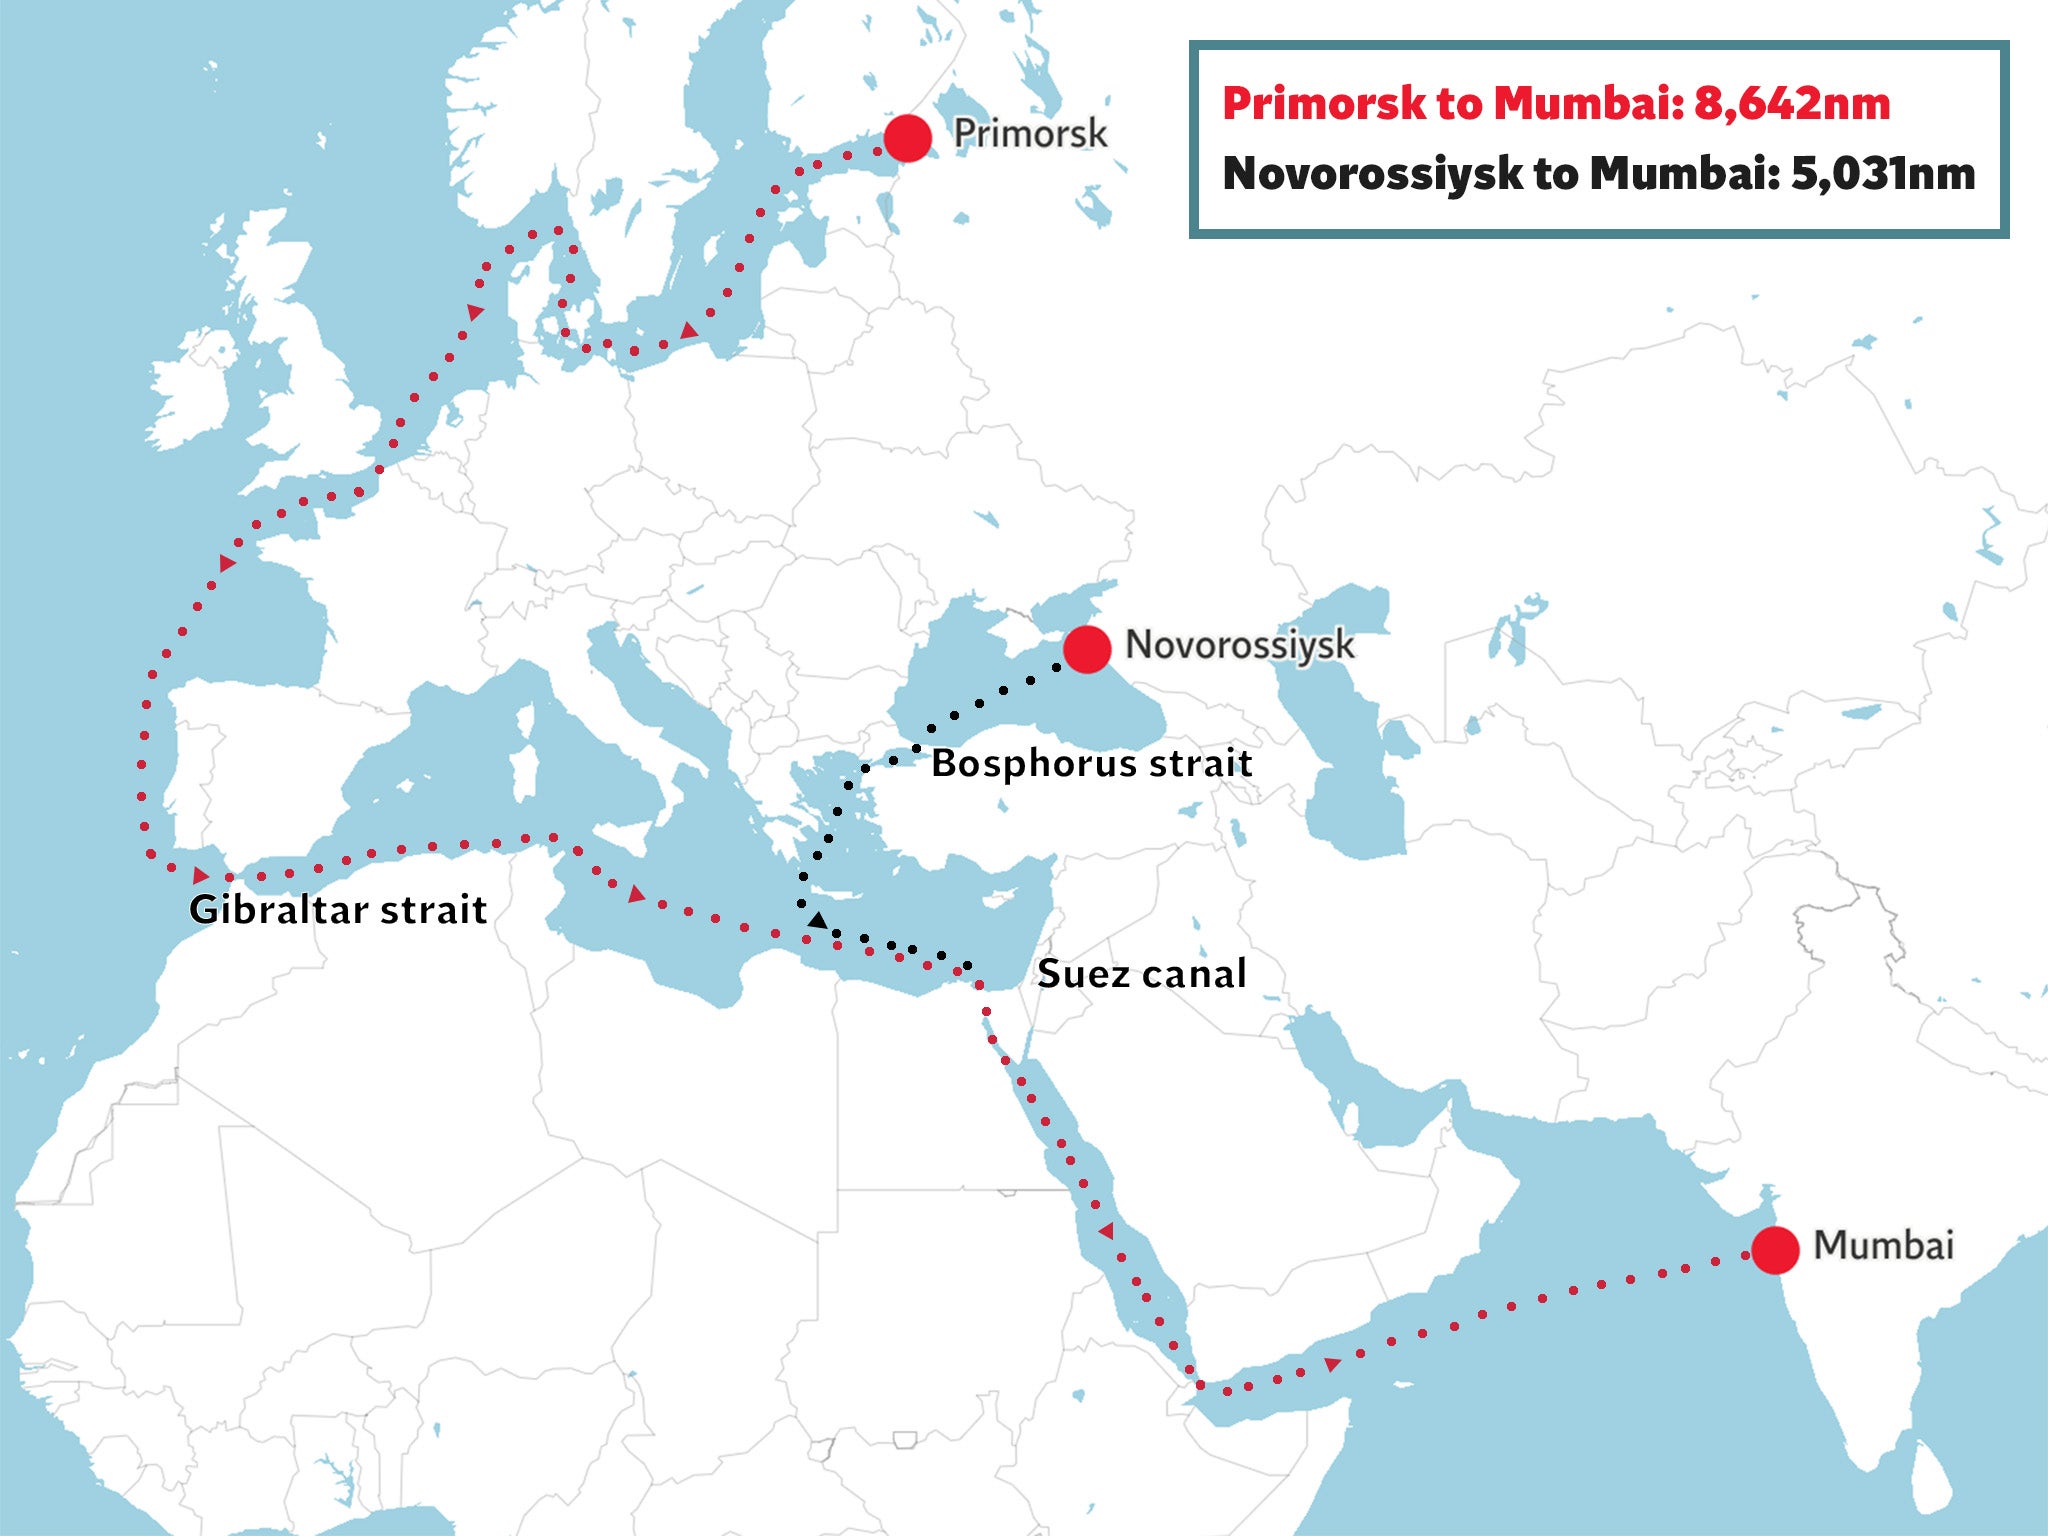 Routes for Russian oil to India. To reach India, tankers bringing oil from Russia can either go from the Baltic Sea through the Danish Straits, Gibraltar and the Suez Canal, or from the Black Sea through the Bosphorus Strait and Suez Canal